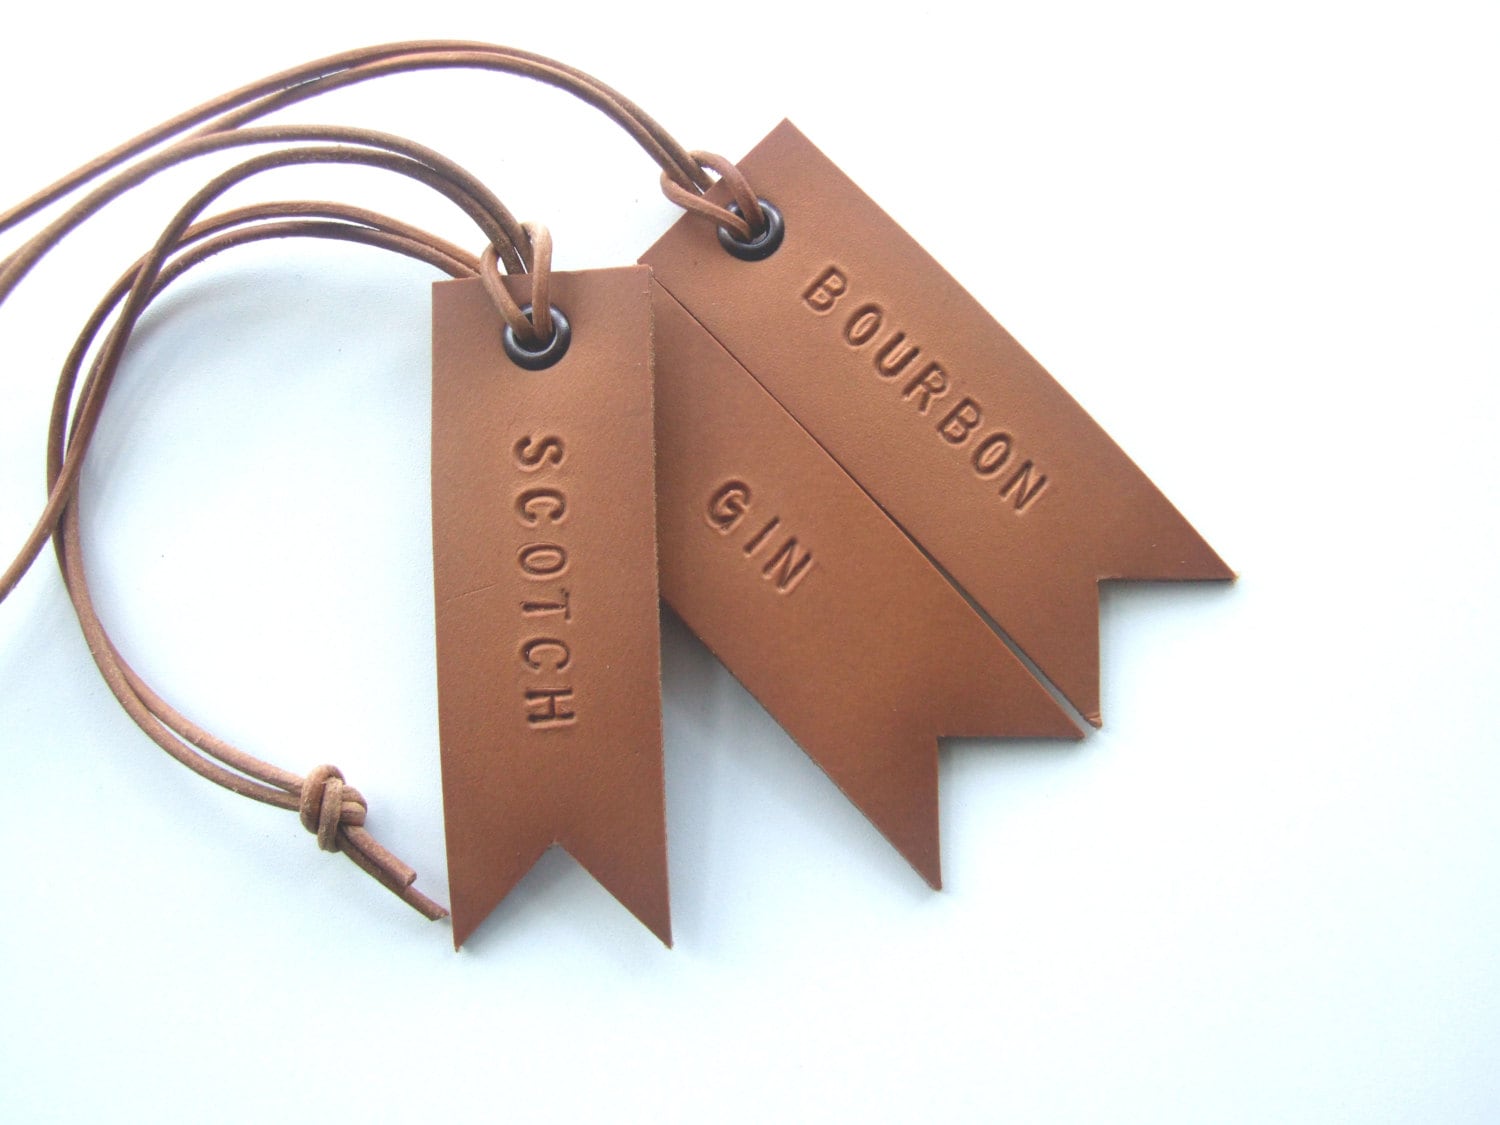 Set of 3 Decanter Tags Hand Stamped Leather Tags Gift for